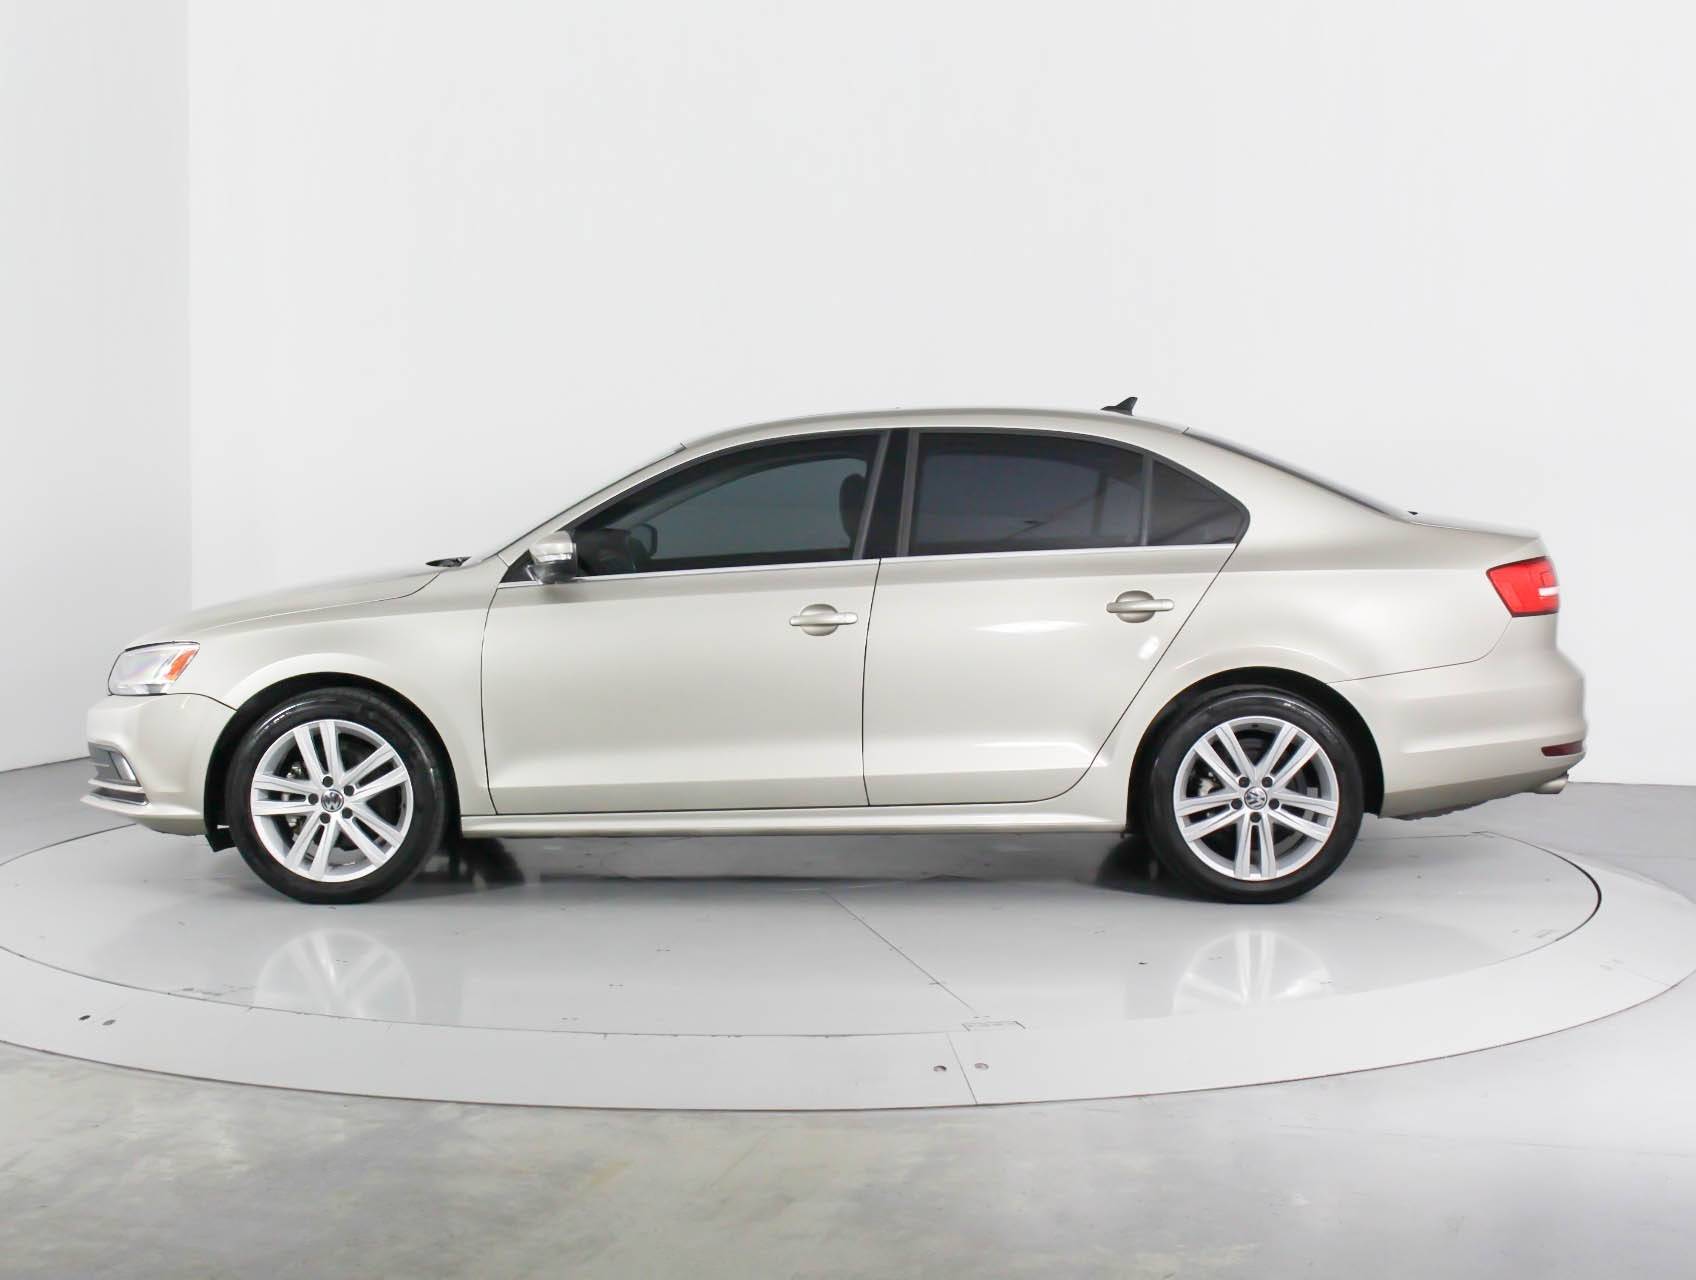 Florida Fine Cars - Used VOLKSWAGEN JETTA 2015 WEST PALM SEL